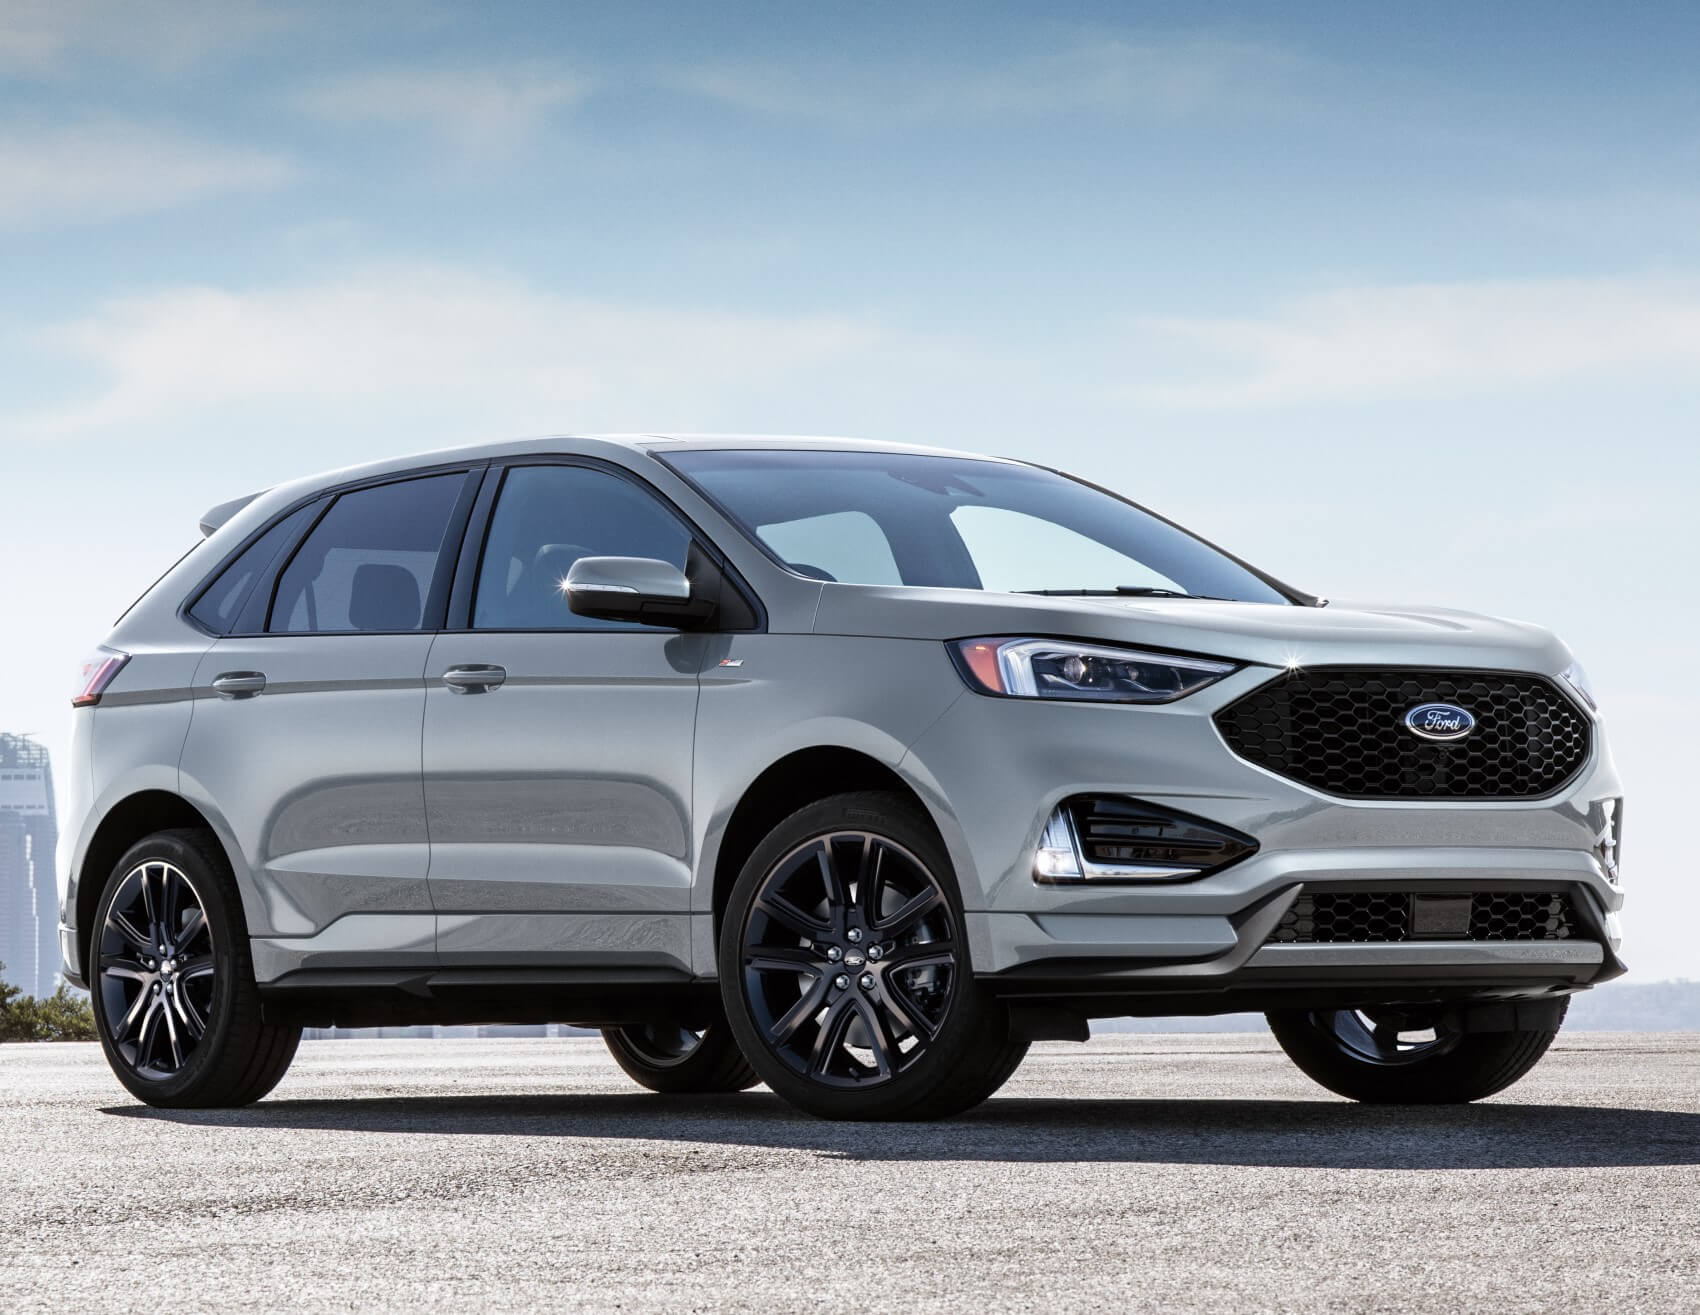 Ford SUV Performance at Tunkhannock Ford in Tunkhannock, MA